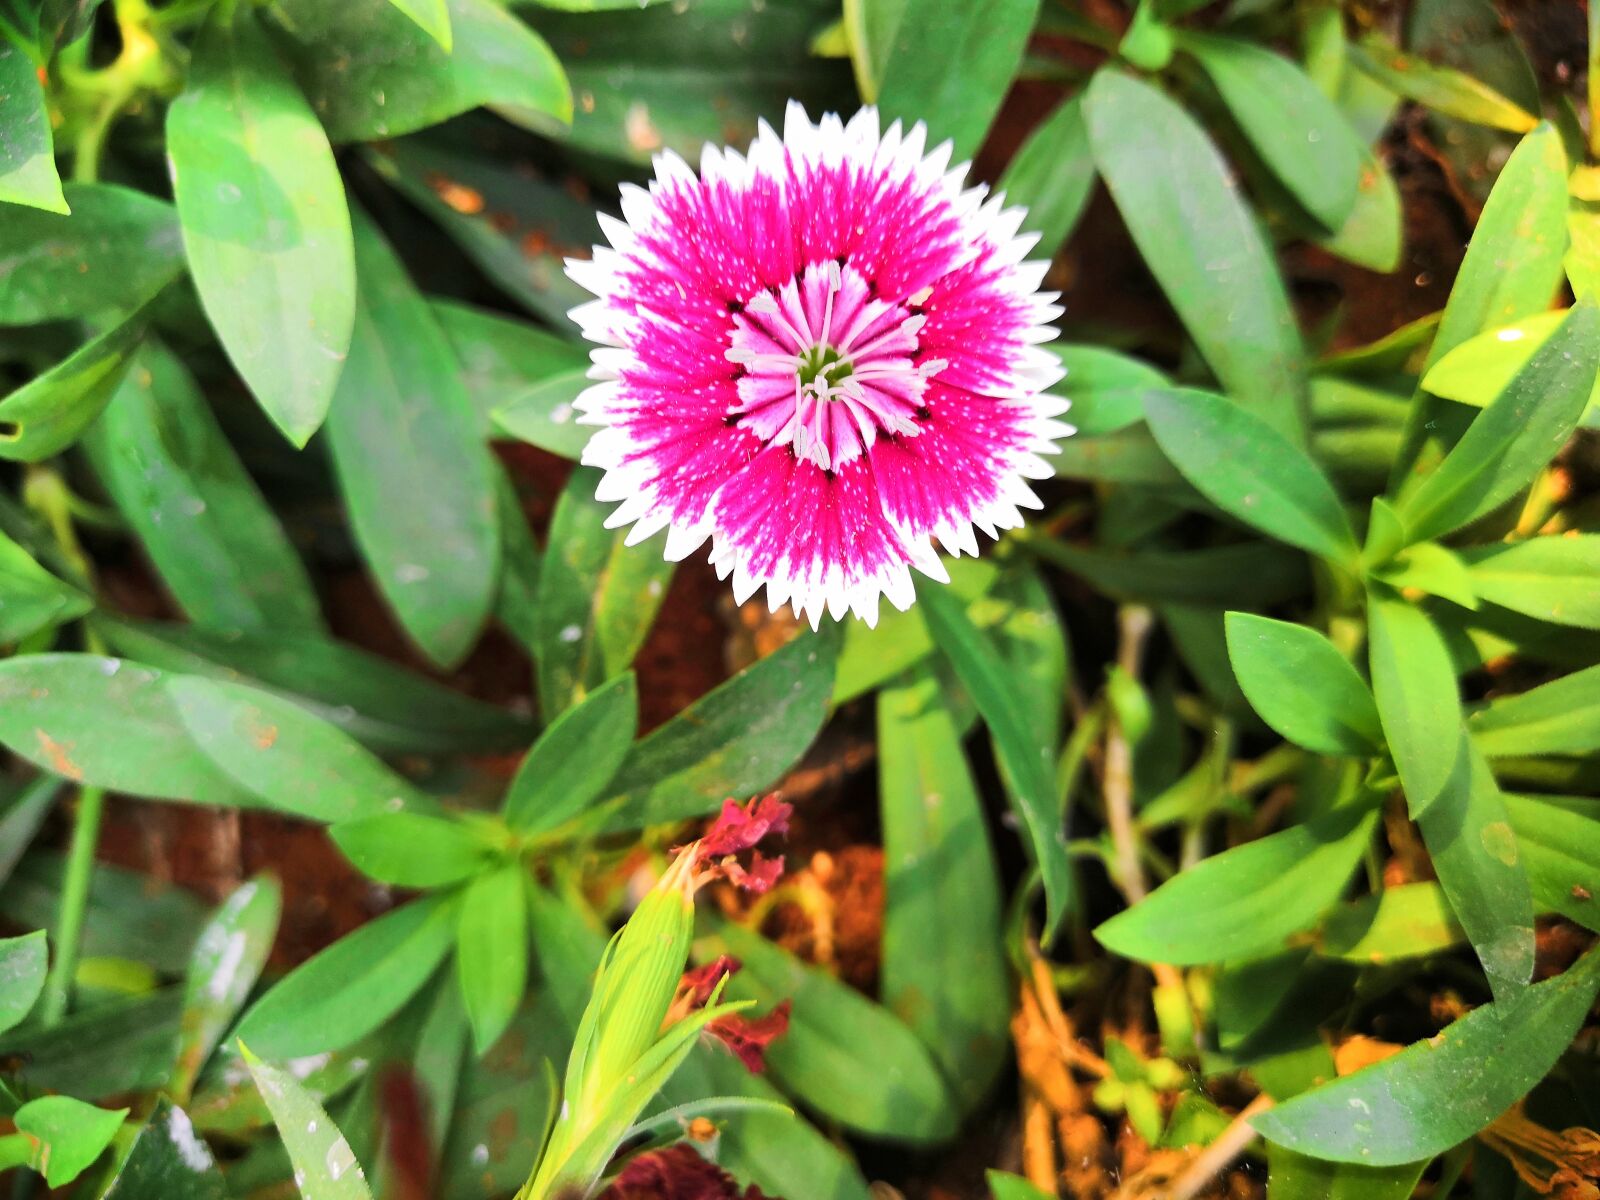 HUAWEI Honor 10 sample photo. Flower, mid-autumn festival, nature photography